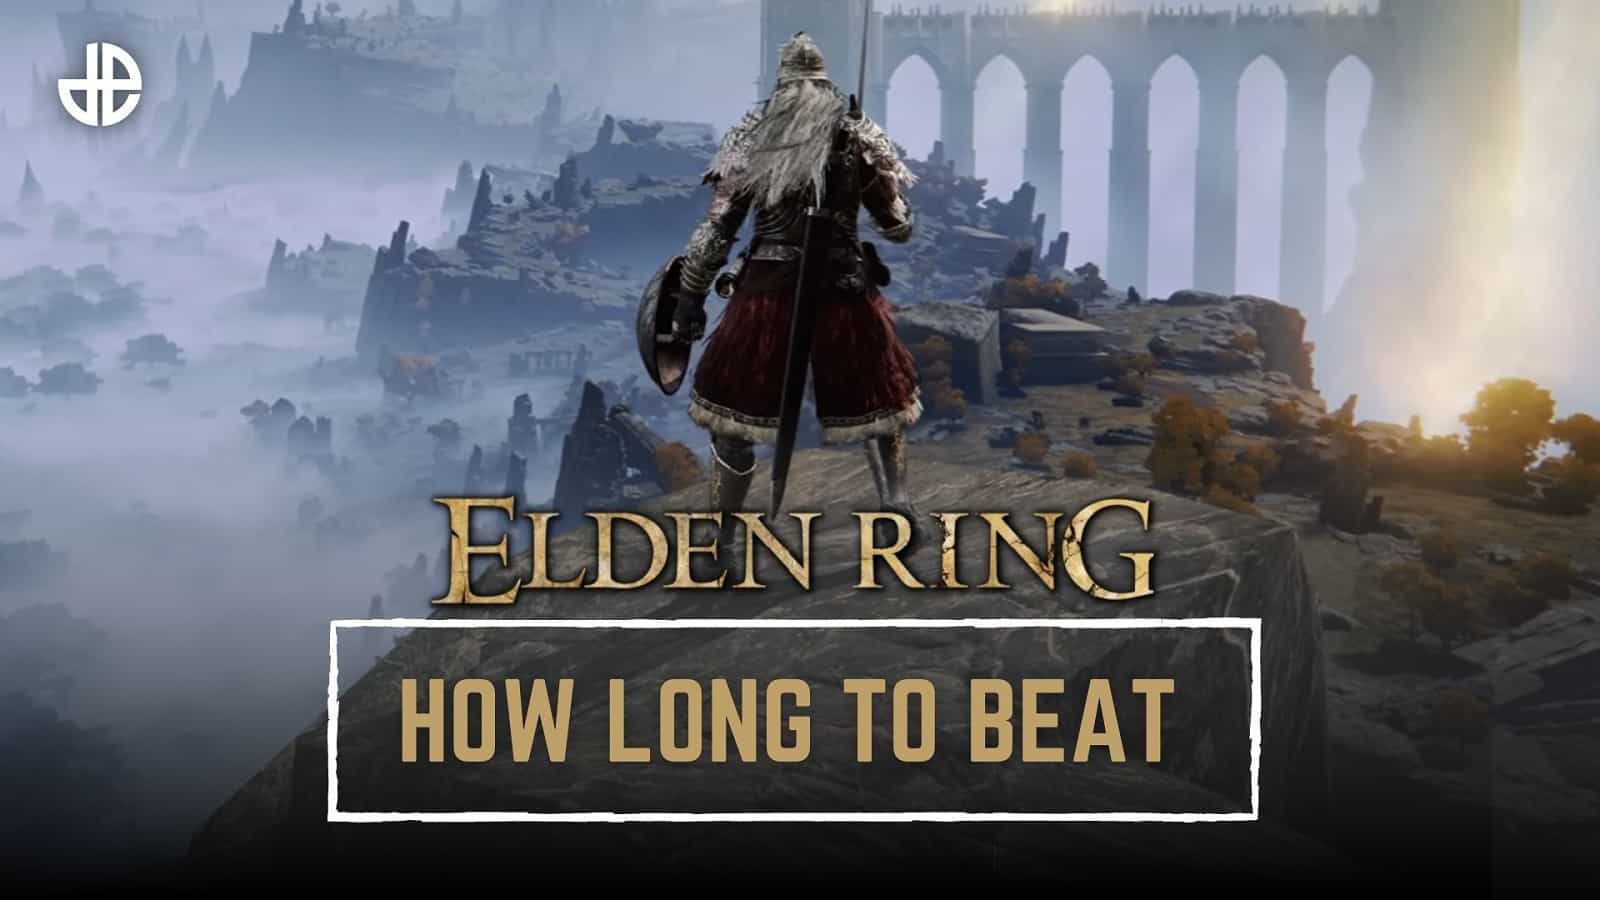 Love that so many Elden Ring players that read the lore actually